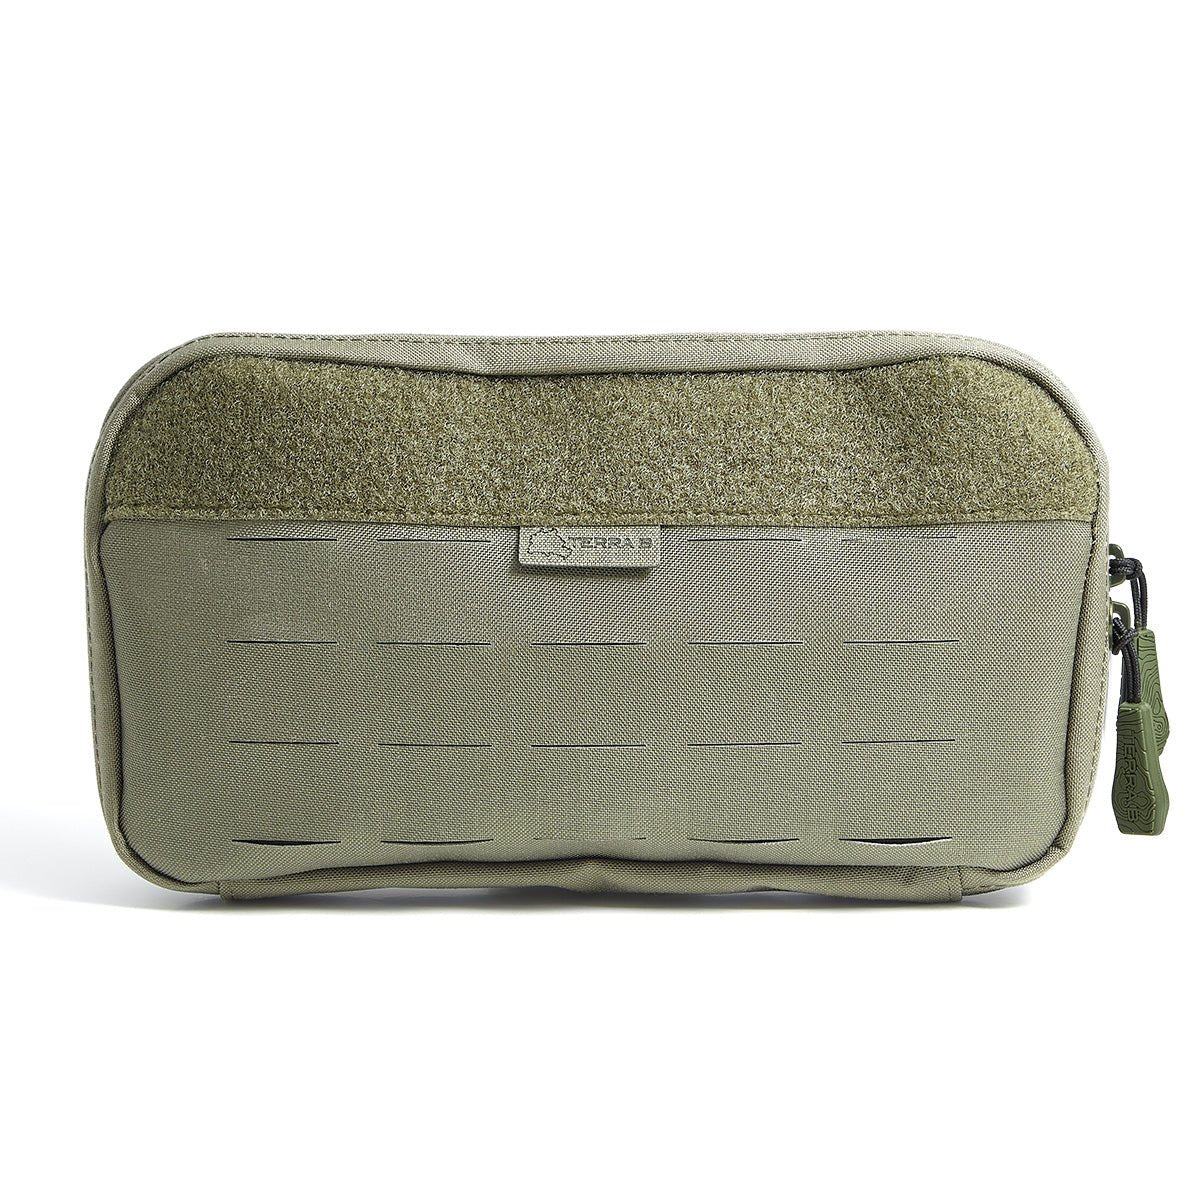 TERRA B Leader Pouch - Olive